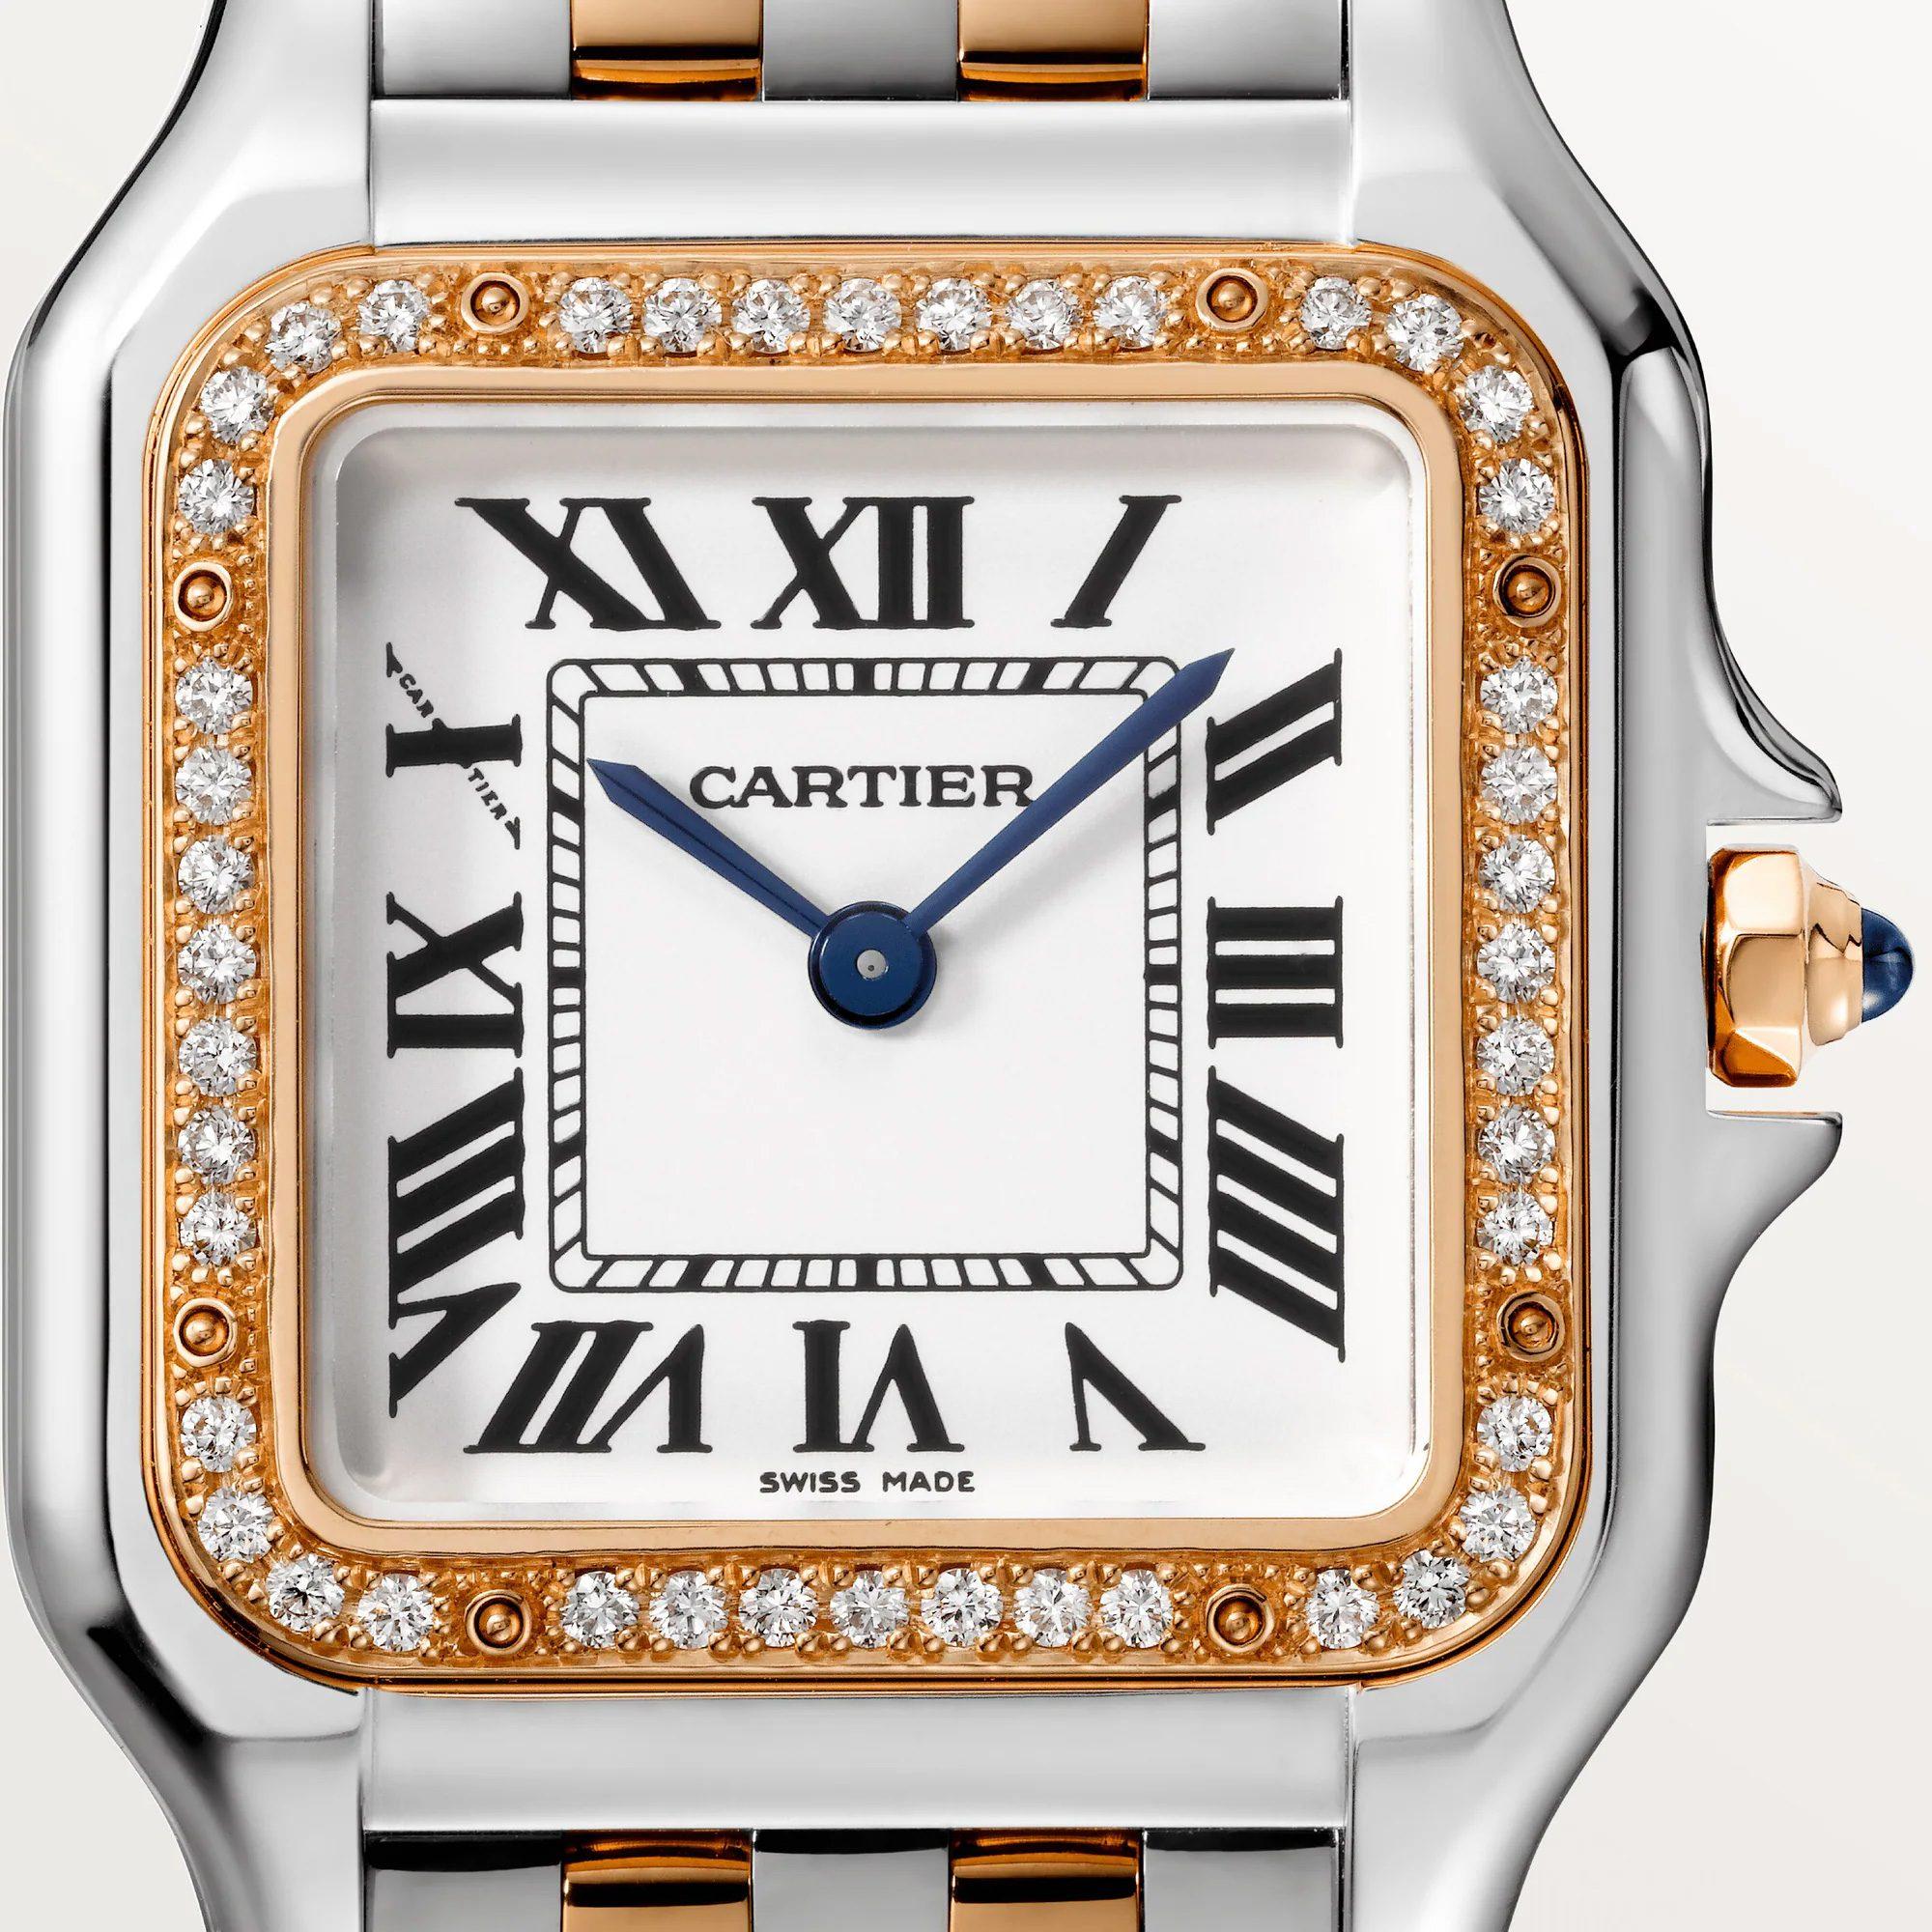 Panthere de Cartier Watch in Rose Gold with Diamonds 3